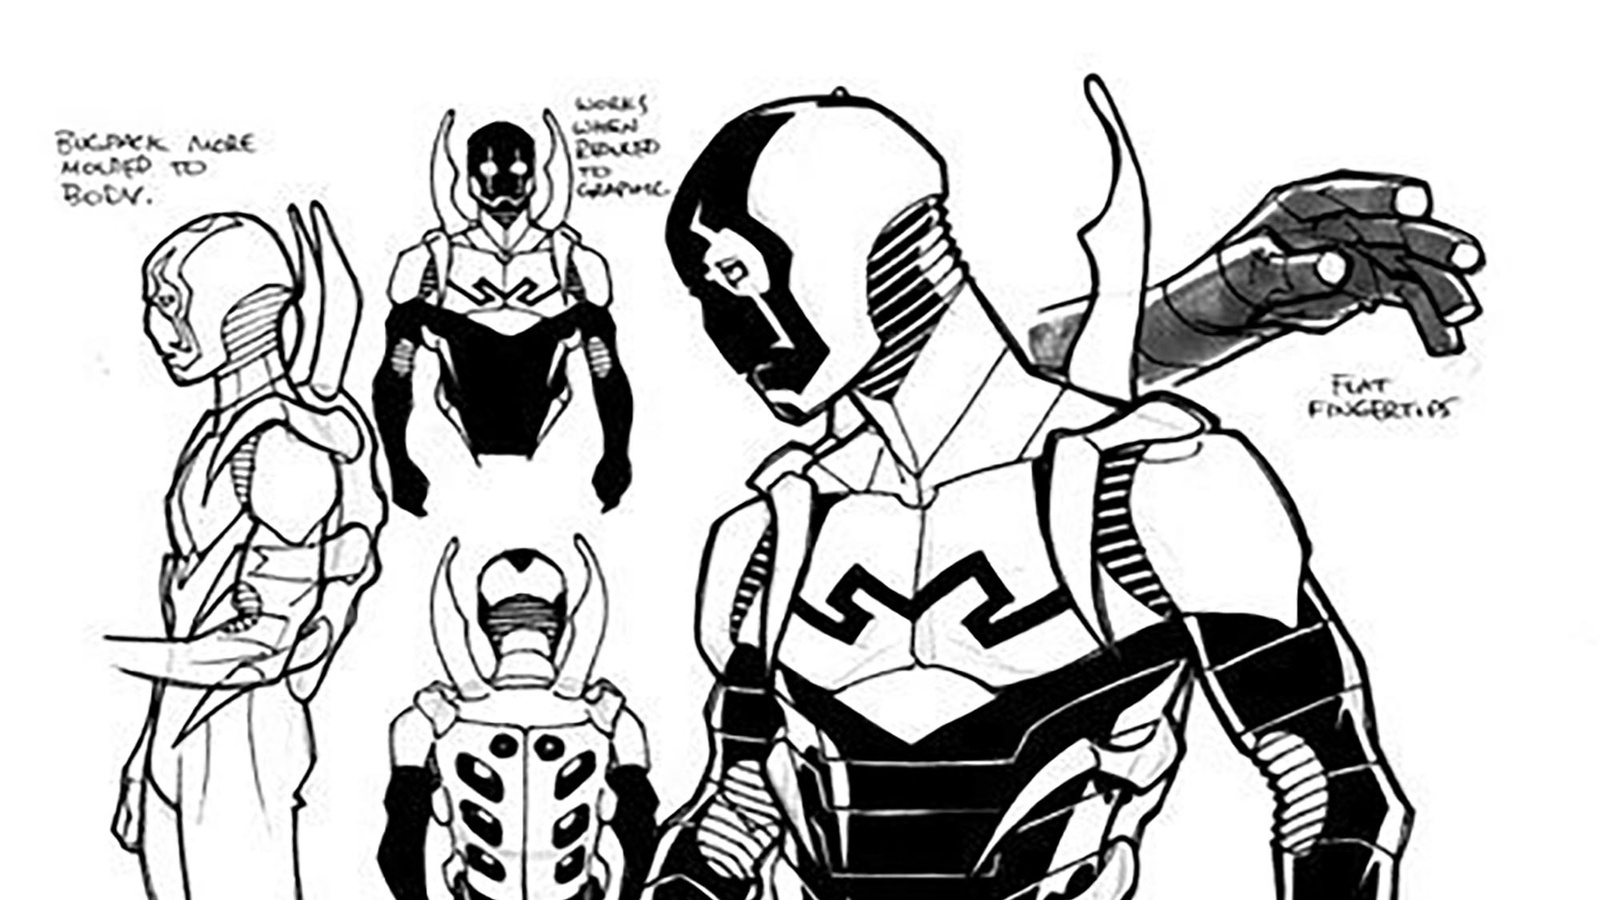 Here Are Jamie Reyes' Best Blue Beetle Appearances in the DC